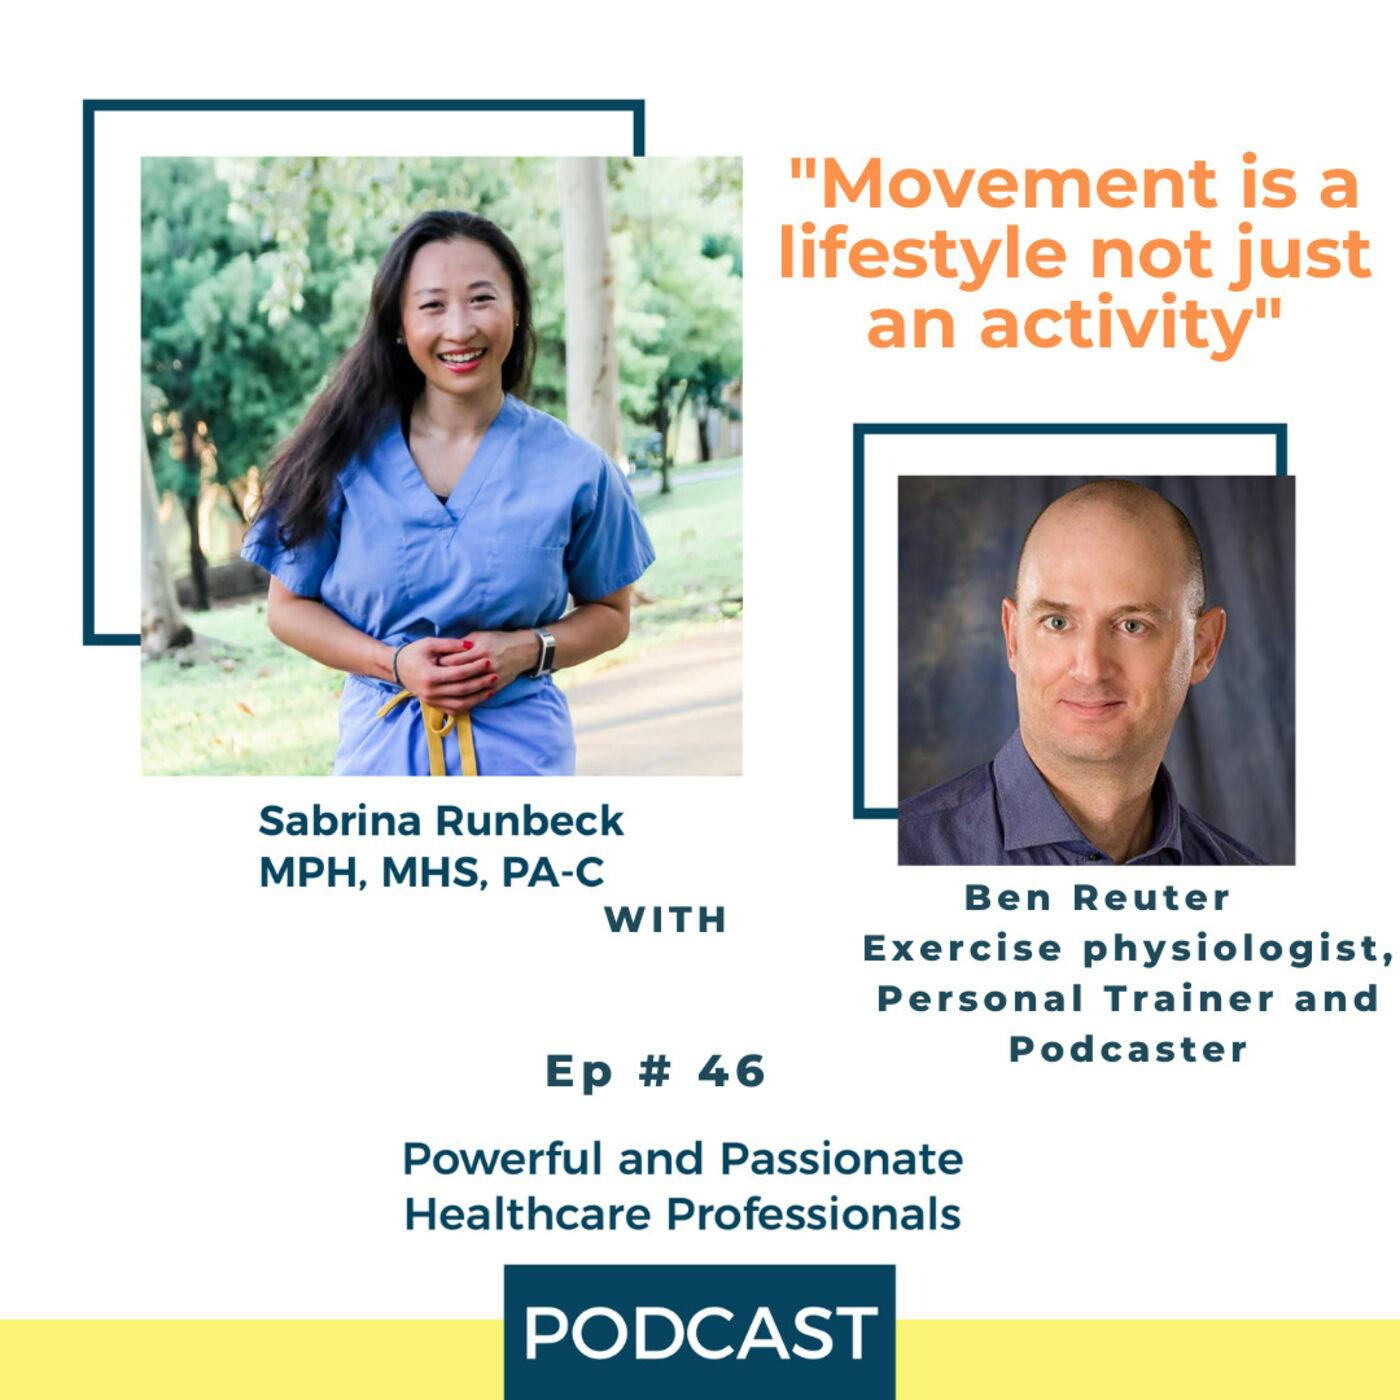 Ep 46 – Movement is a lifestyle not just an activity with Ben Reuter